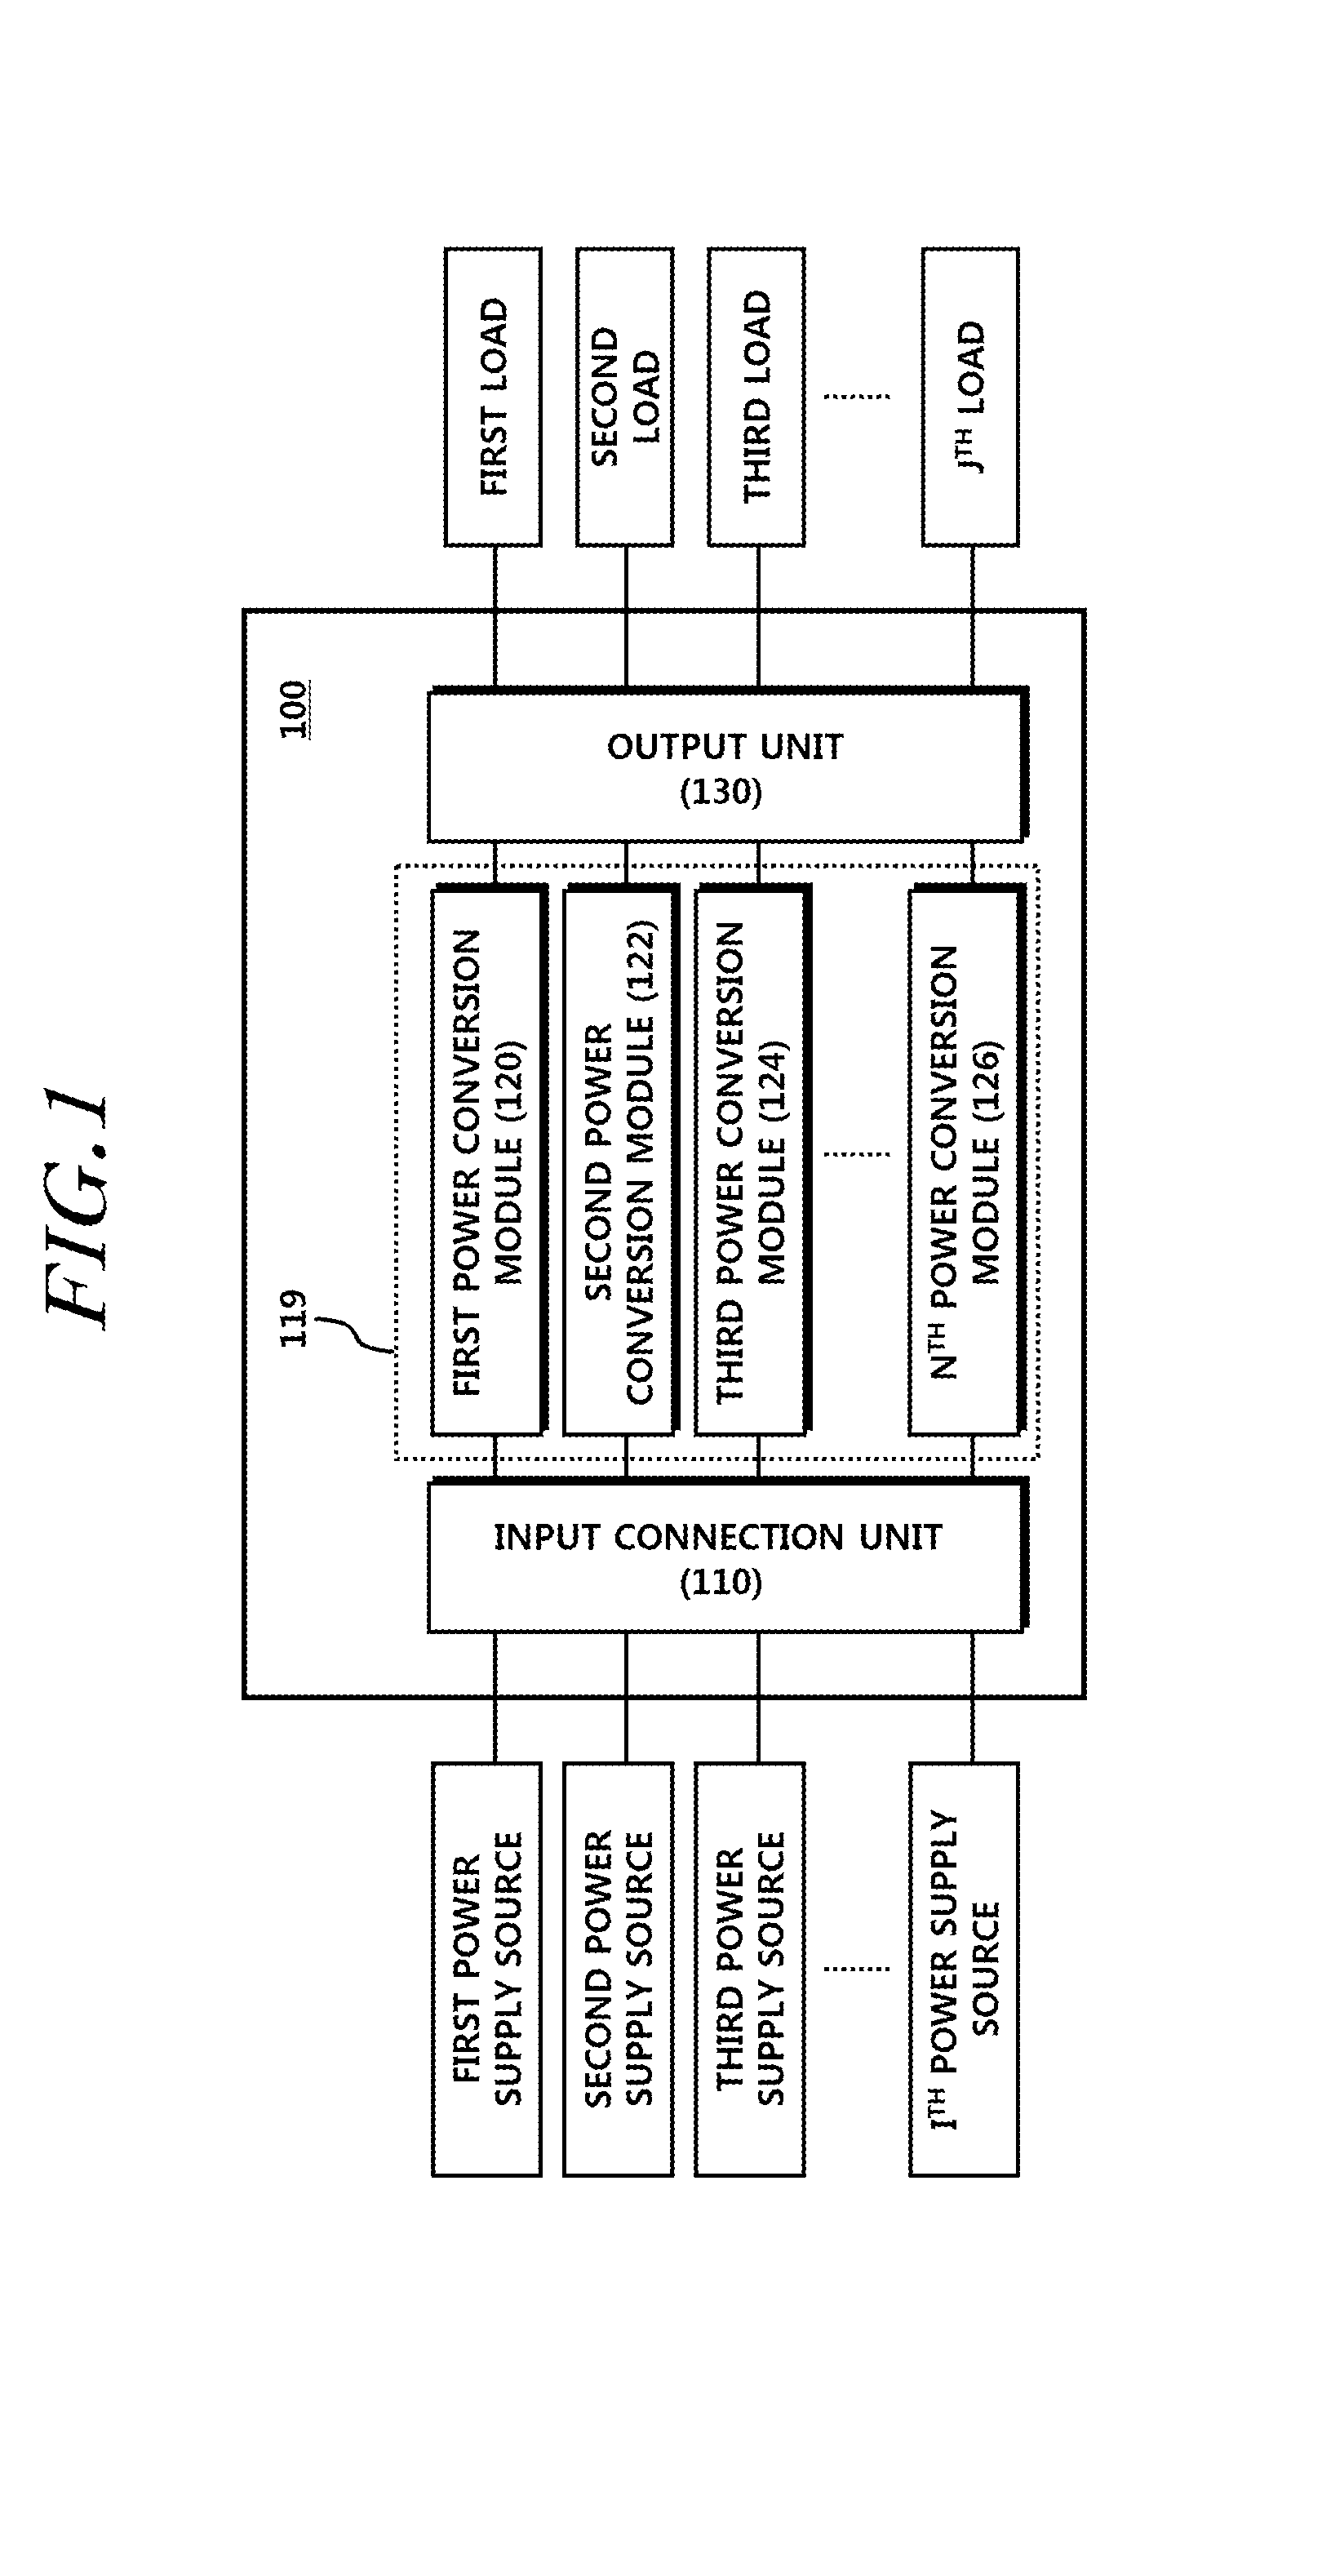 System and method for converting electric power, and apparatus and method for controlling the system